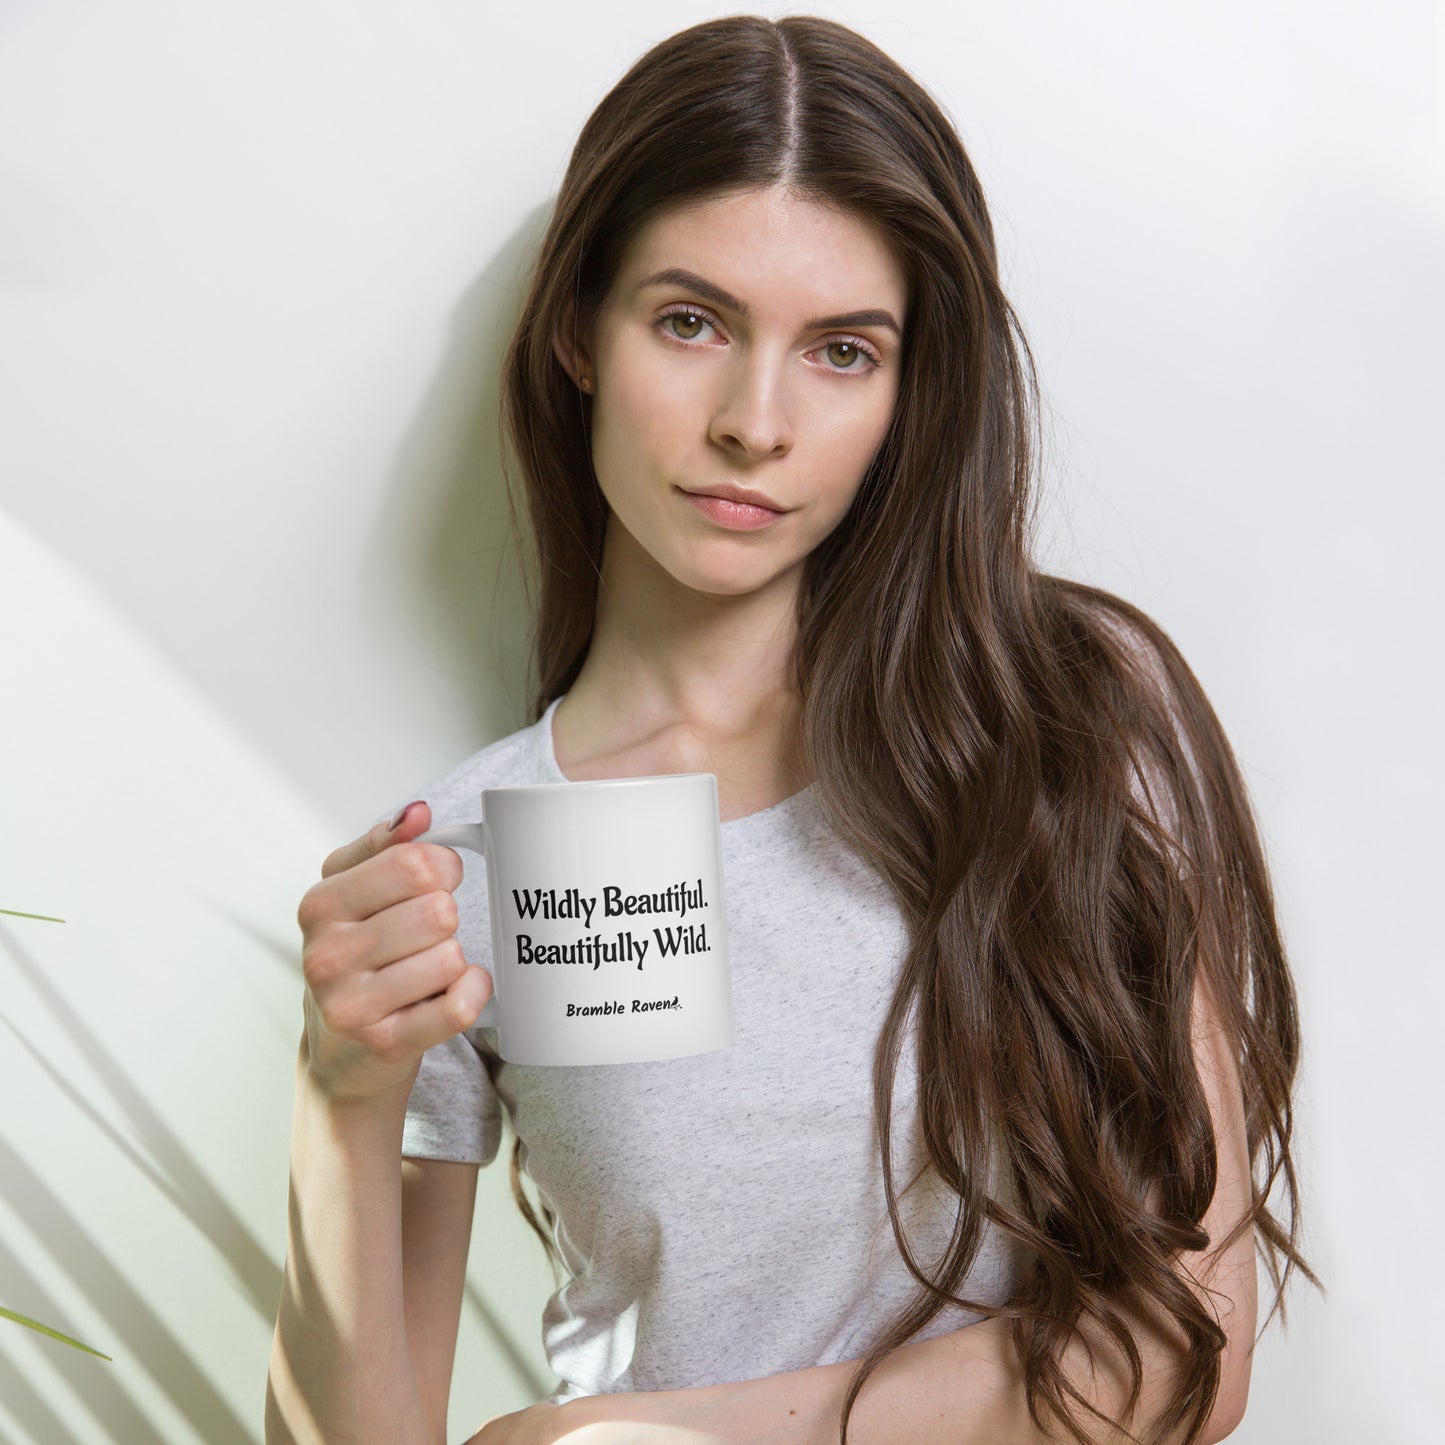 20 ounce white ceramic mug. Features hand-illustrated deer skull wreathed in flowers on one side, and text wildy beautiful, beautifully wild on the other side. Shown in female model's hand.